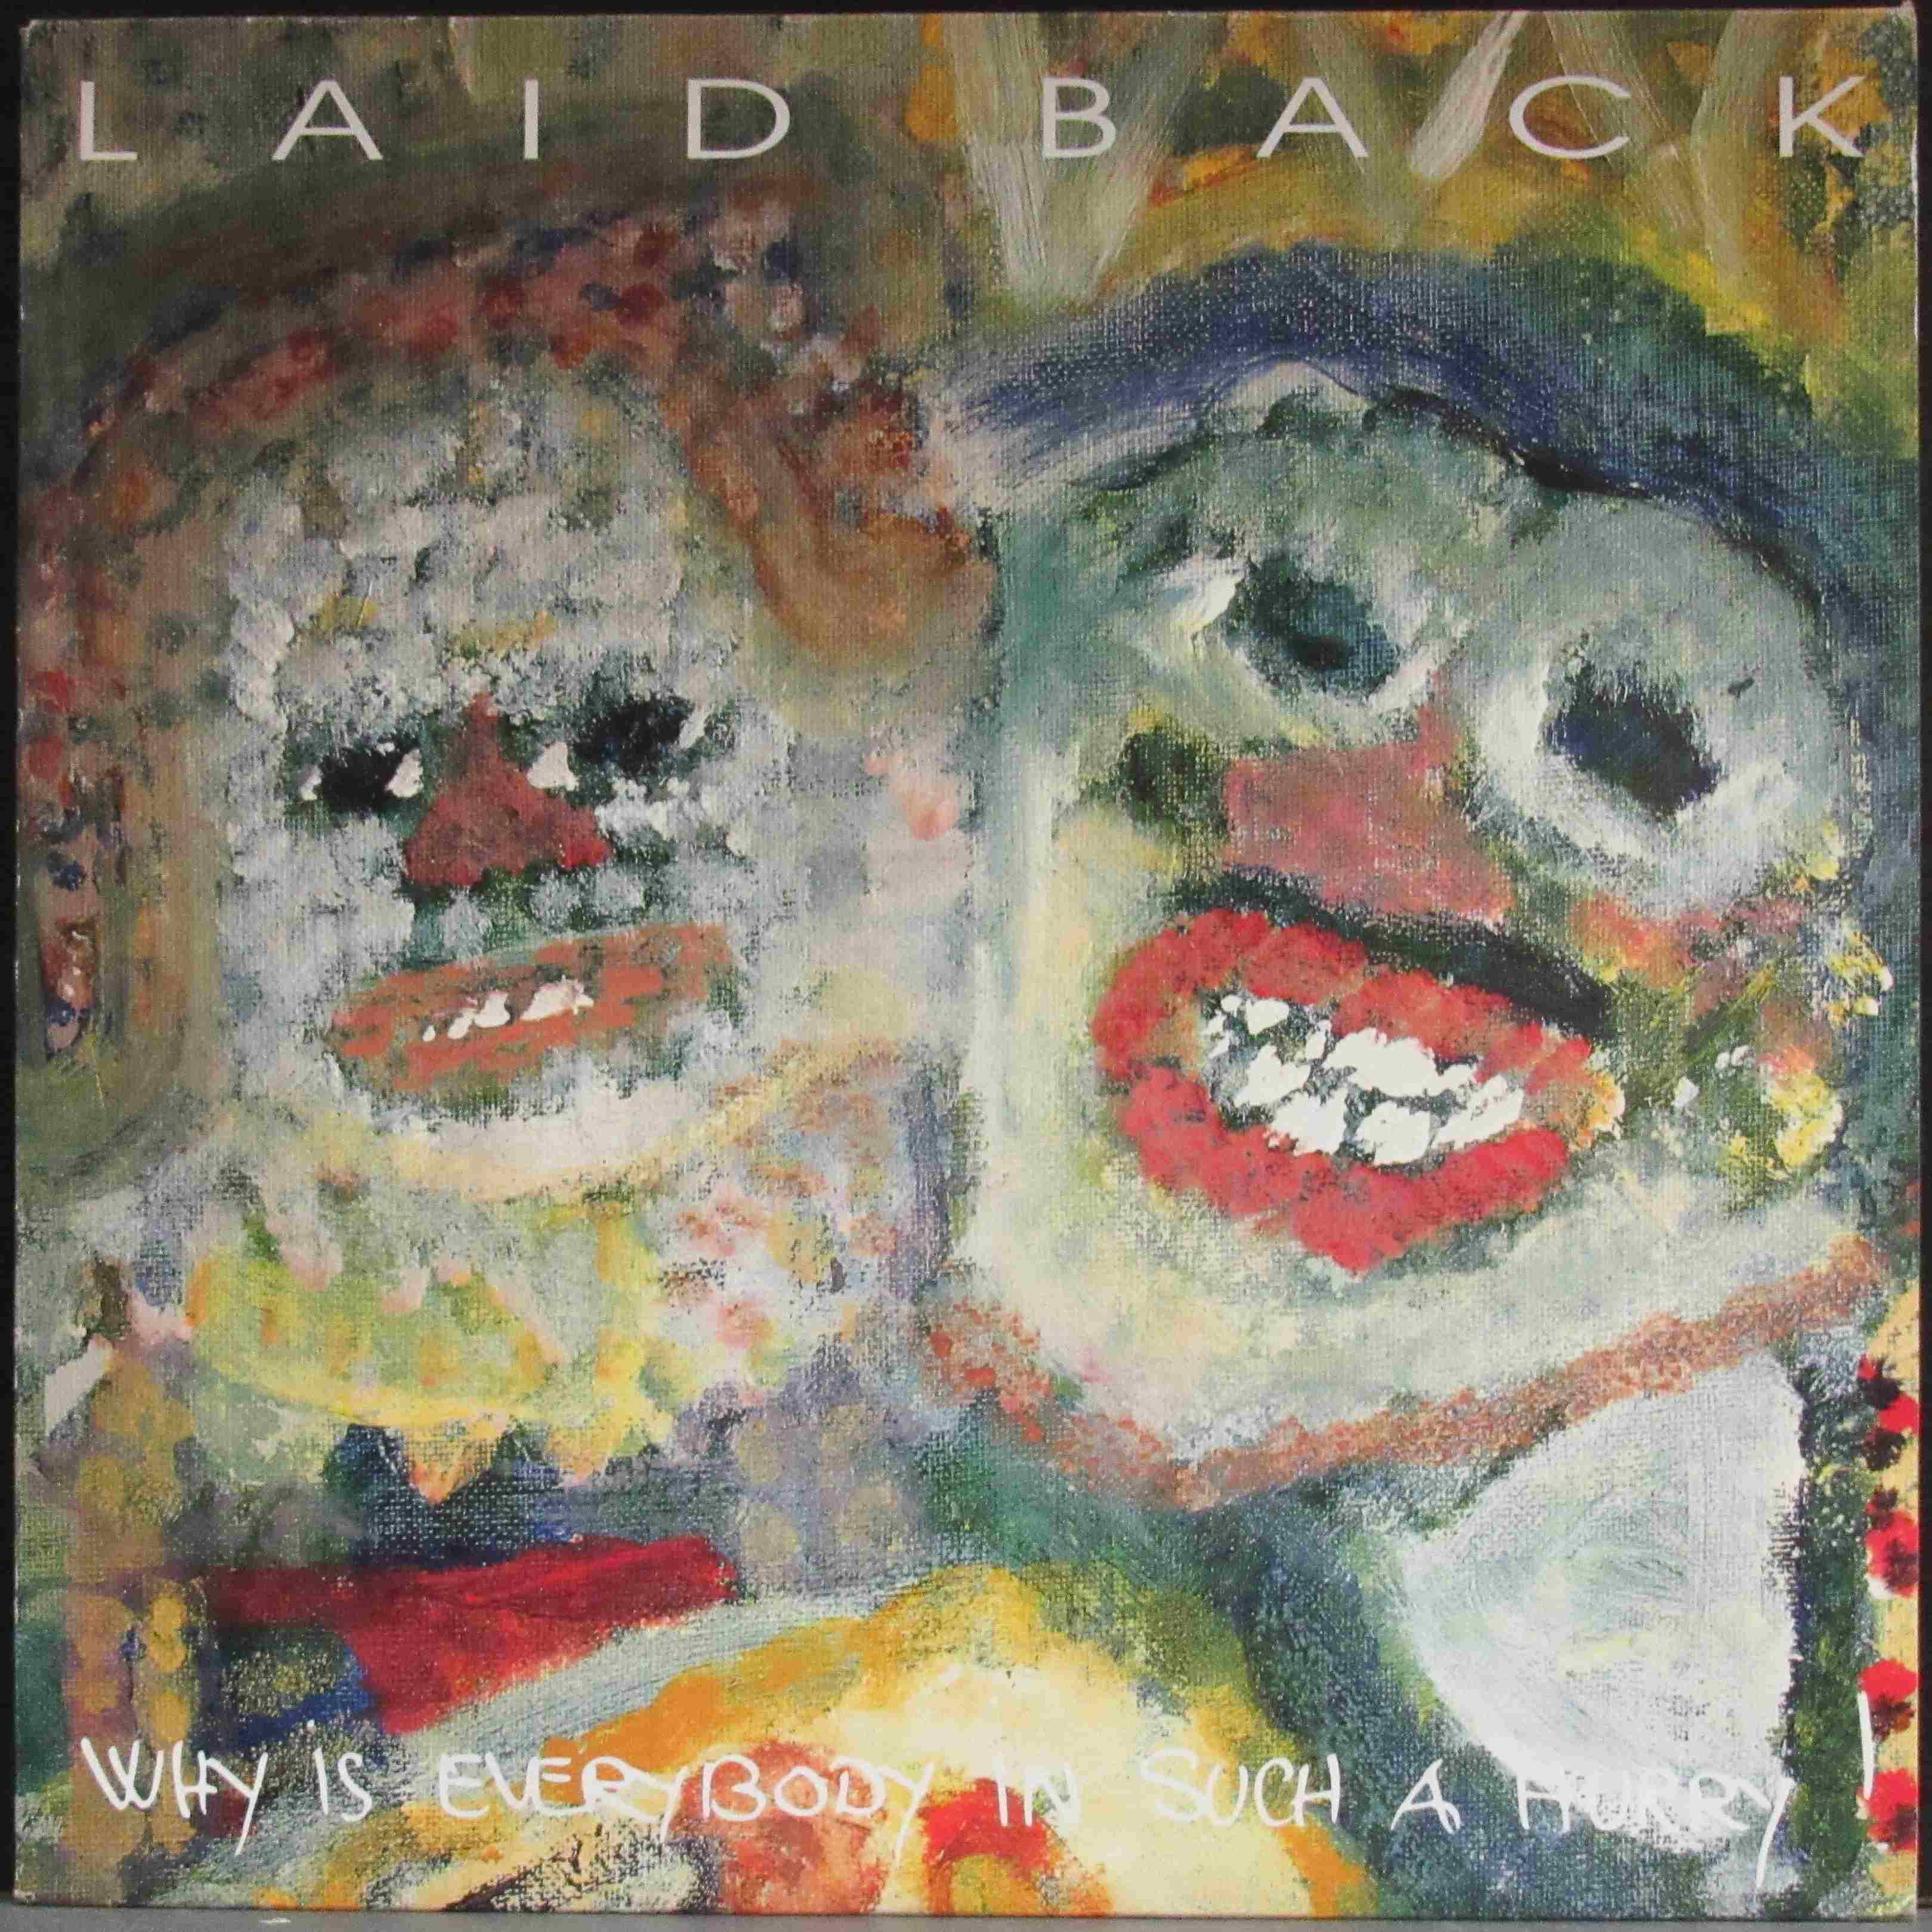 Everybody were happy. Laid back why is Everybody in such a hurry 1993. Laid back album why is Everybody in such a hurry обложка. Laid back обложка. Laid back discography.